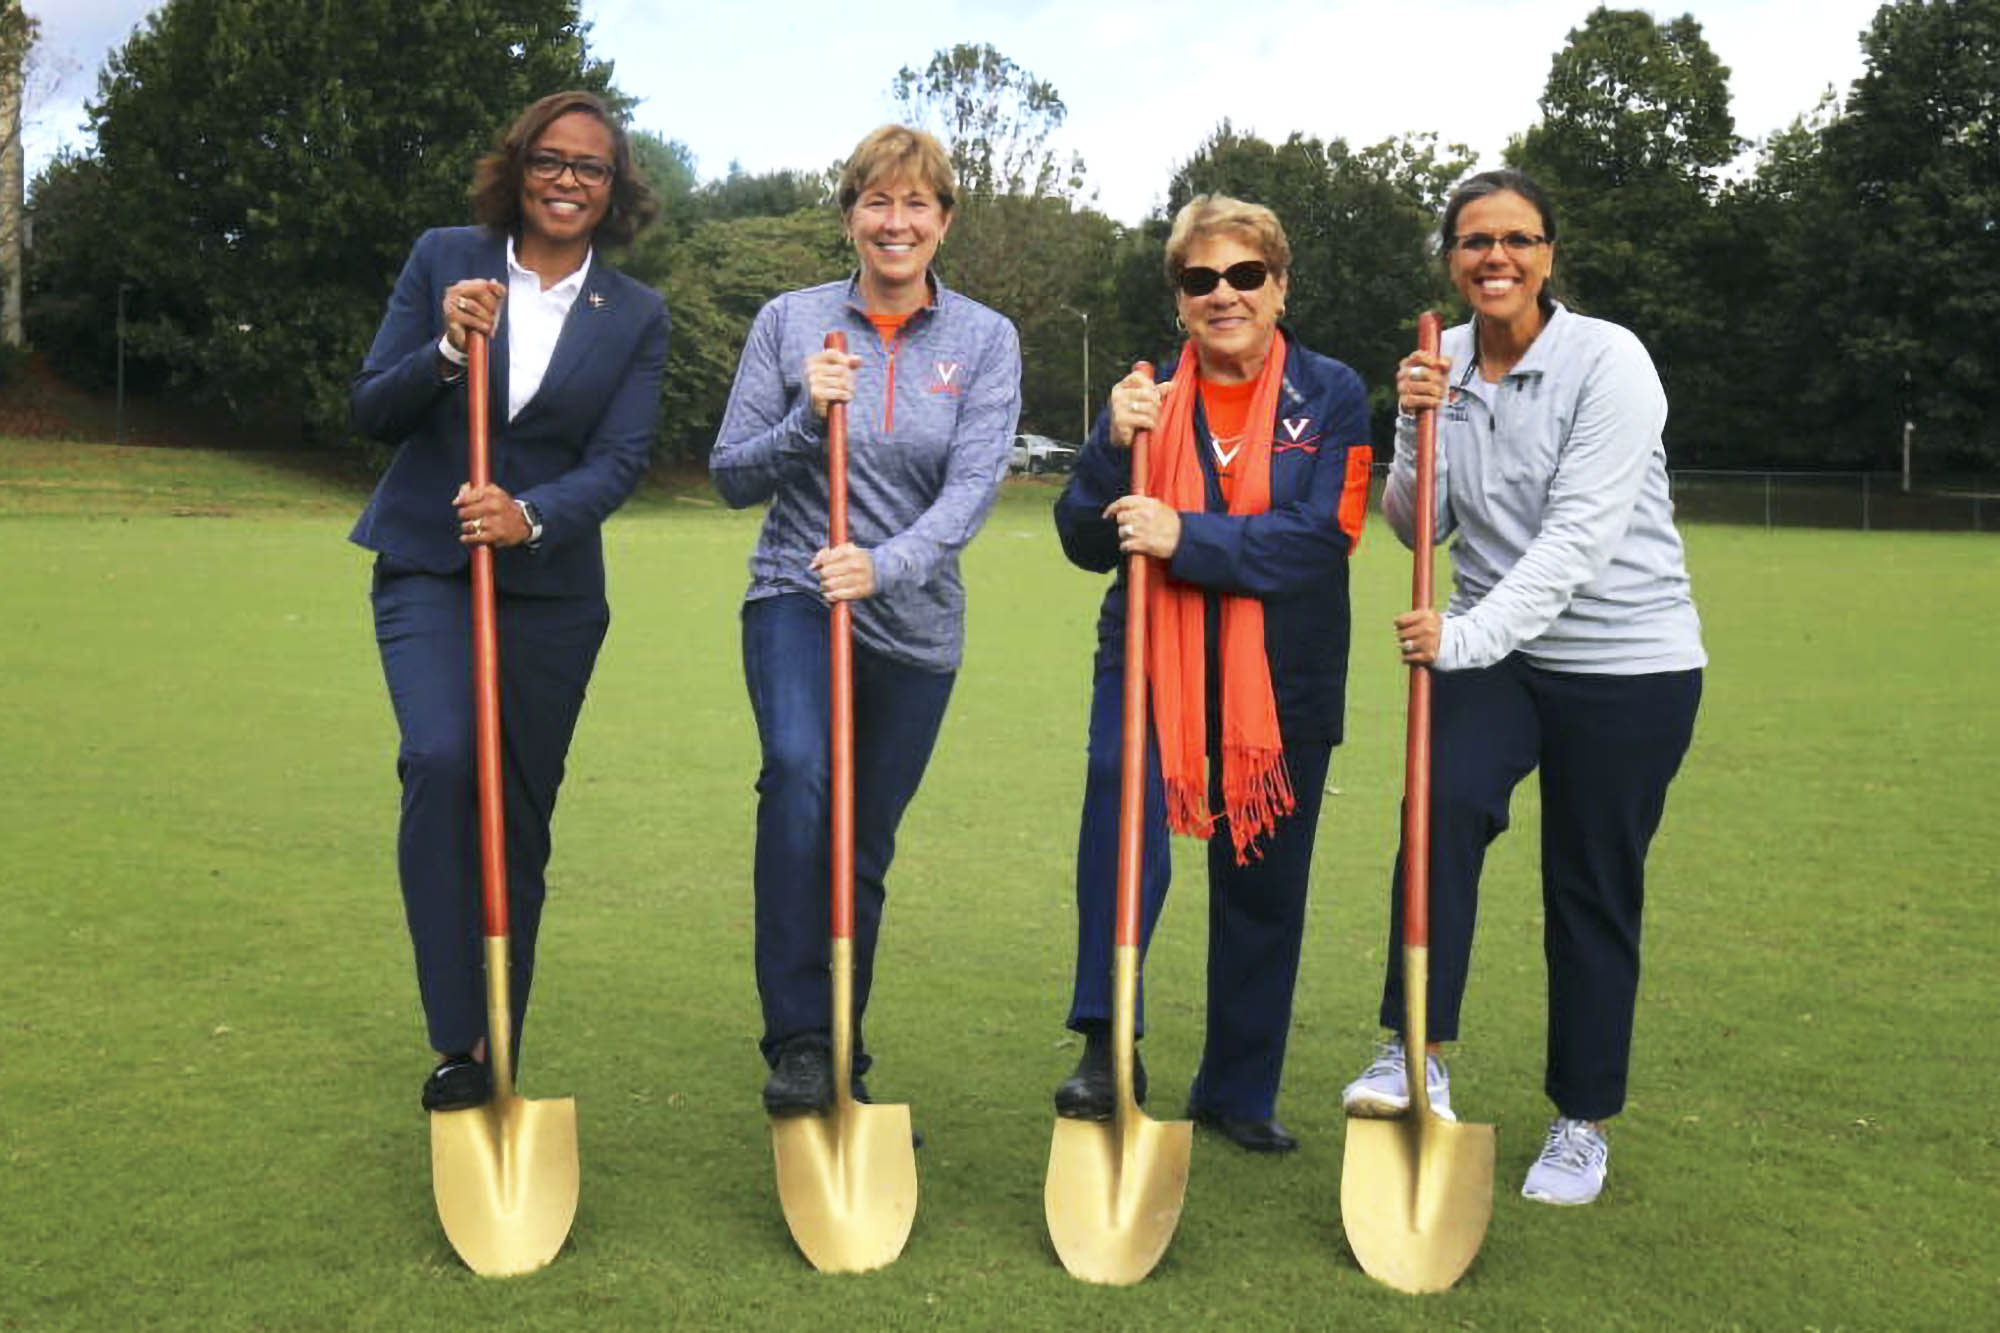 Carla Williams, Lisa Palmer, Fran Palmer, Joanna Hardin all hold golden shovels while they breakground at the Palmer Park in 2018